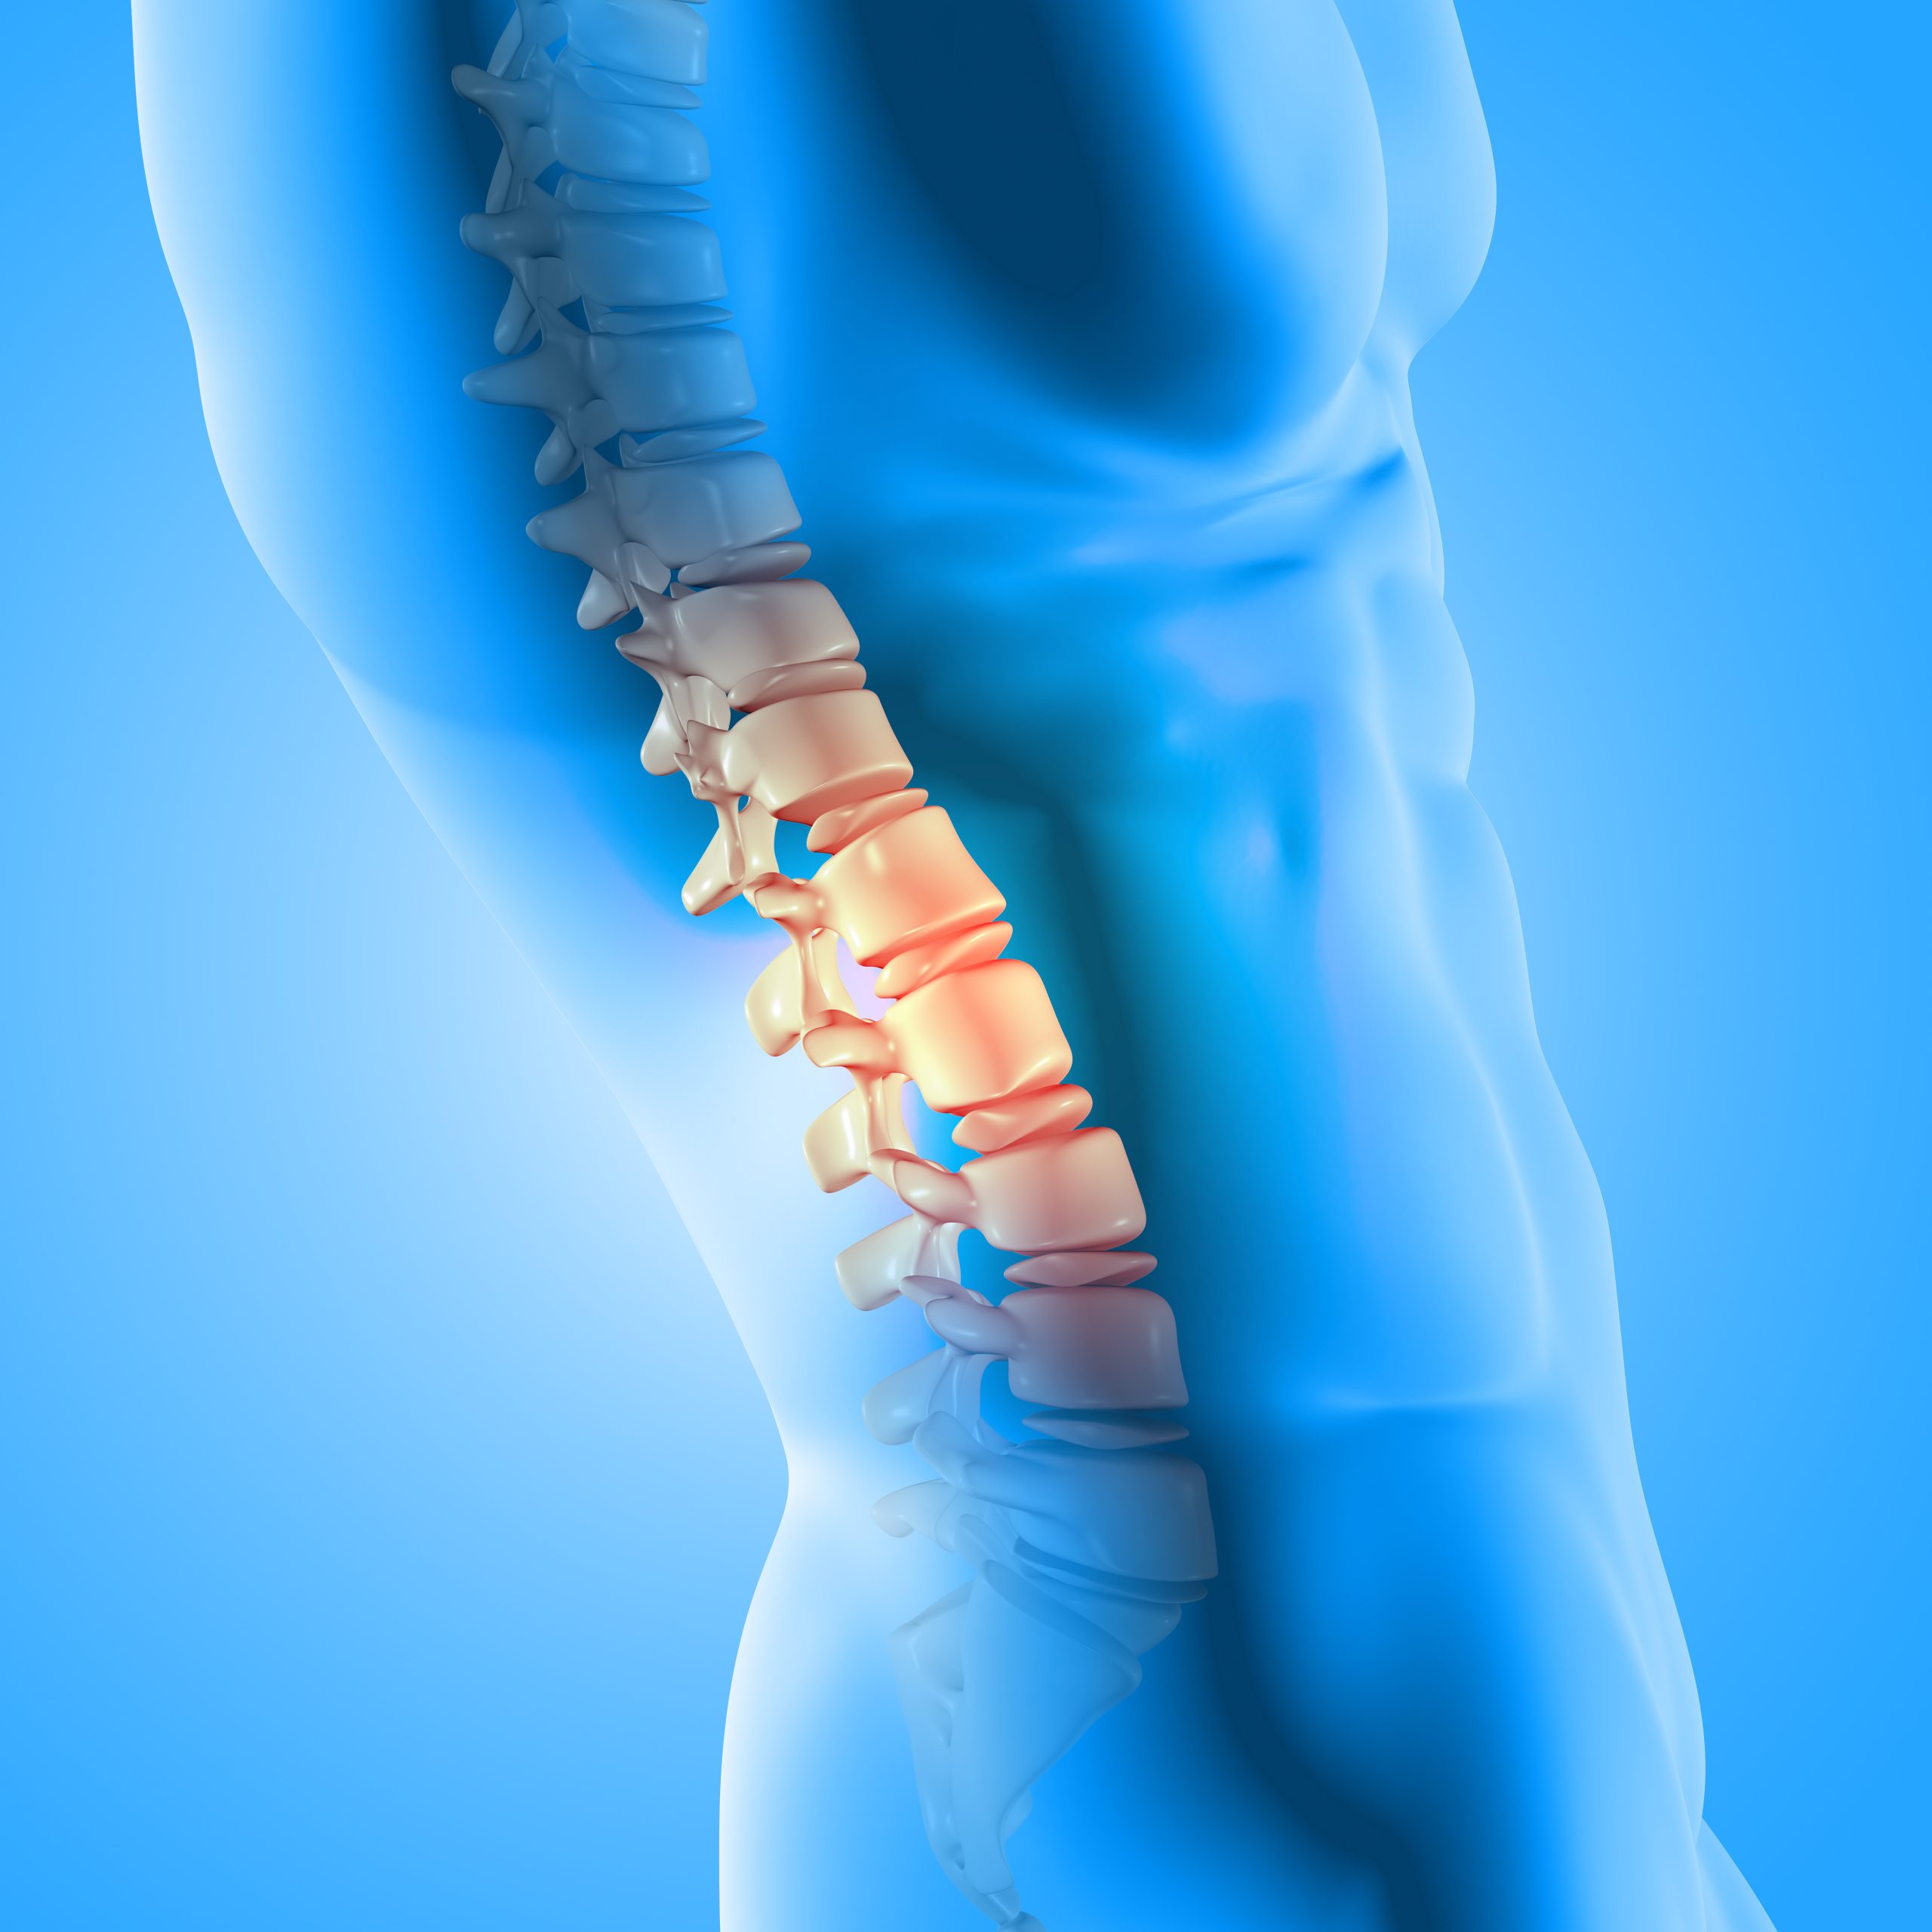 Low BP caused by spinal injury can be fixed